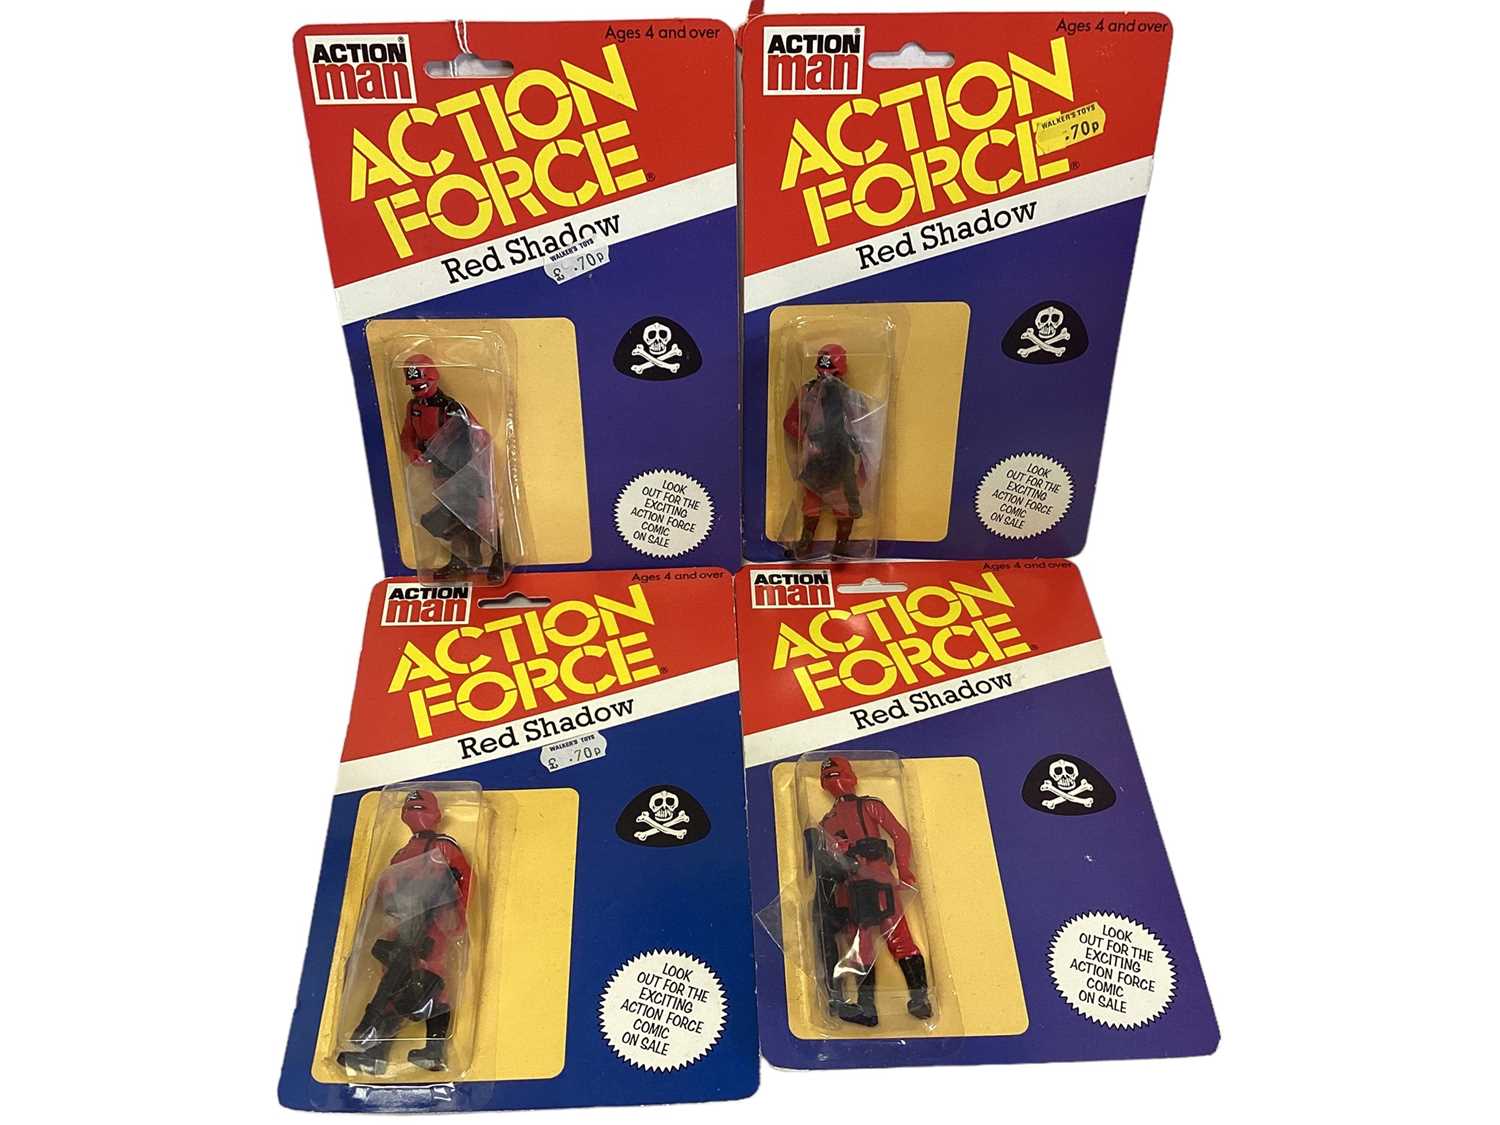 Palitoy Action Man Action Force Red Shadow (Single Cell Bubble Version), on card with blister pack (